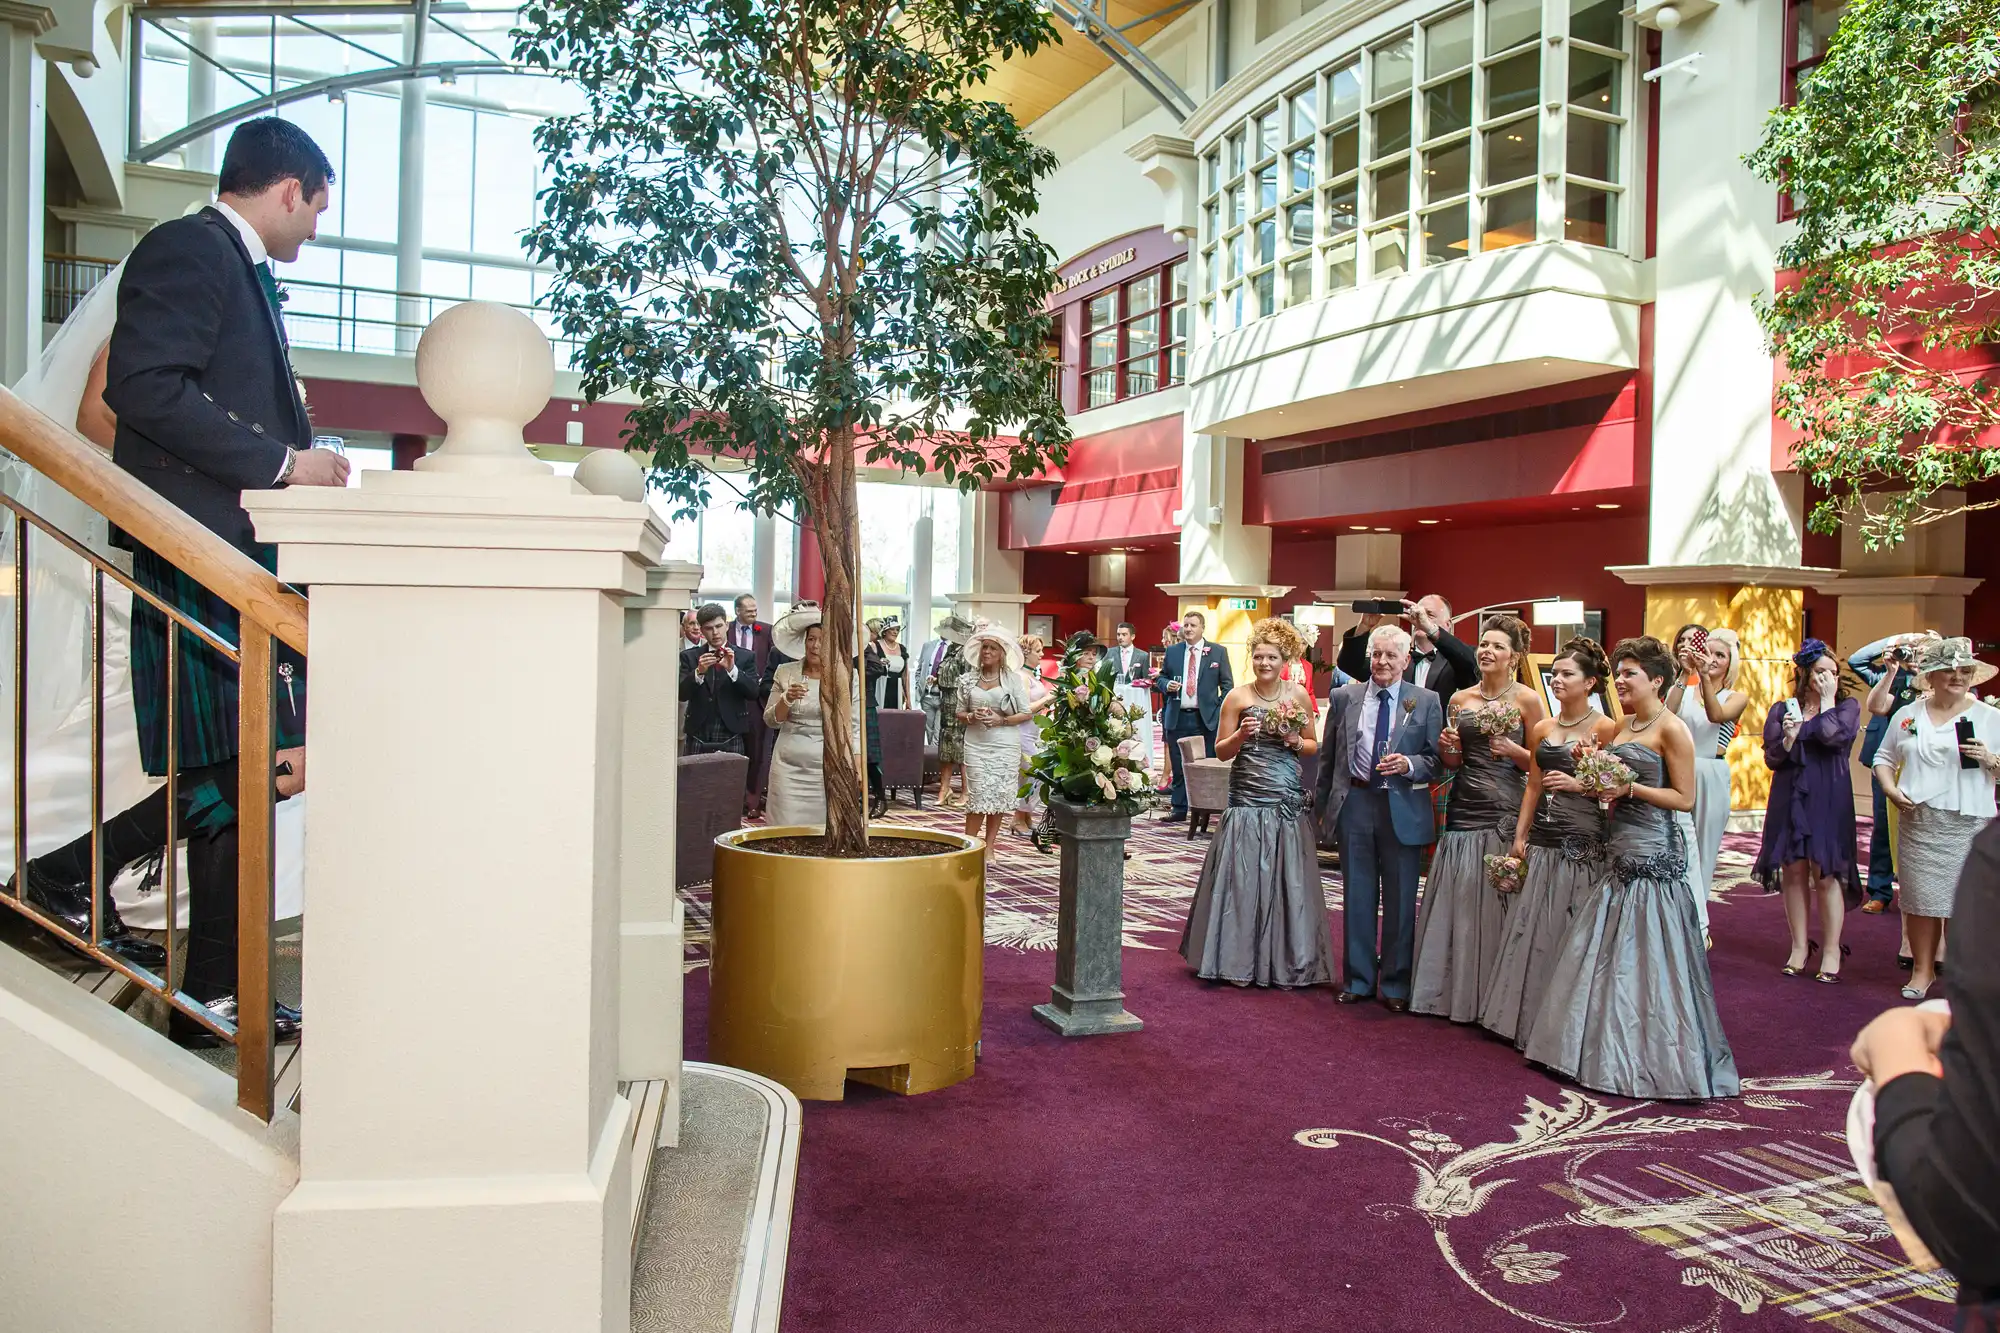 A wedding ceremony in an indoor atrium with guests watching a bride walking up stairs, and a groom waiting by a railing.